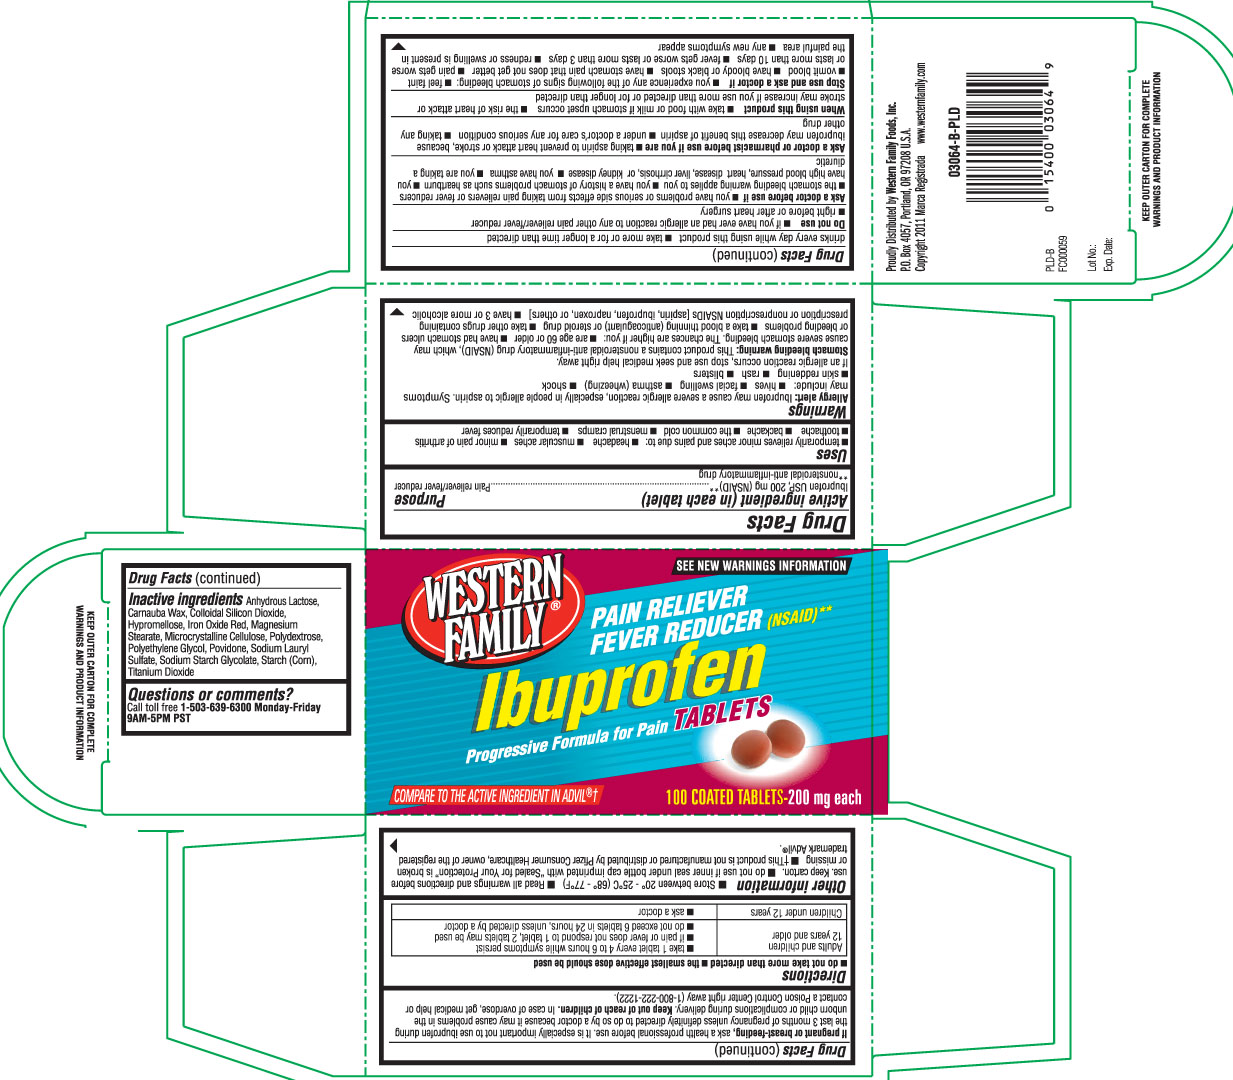 western family Ibuprofen tablets brown 200 mg amneal